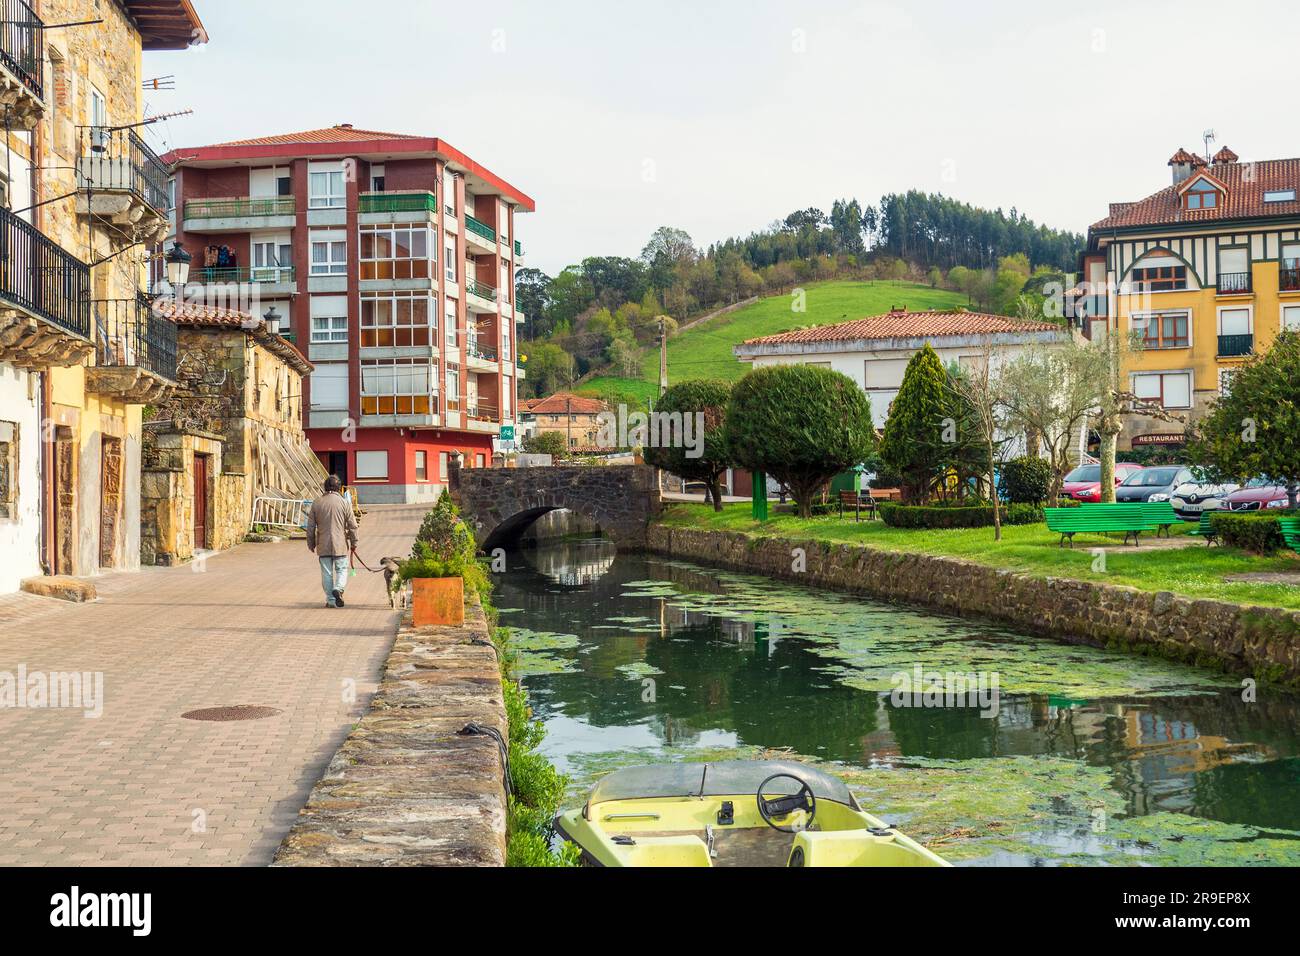 Landscape of the town of Limpias in Cantabria Stock Photo